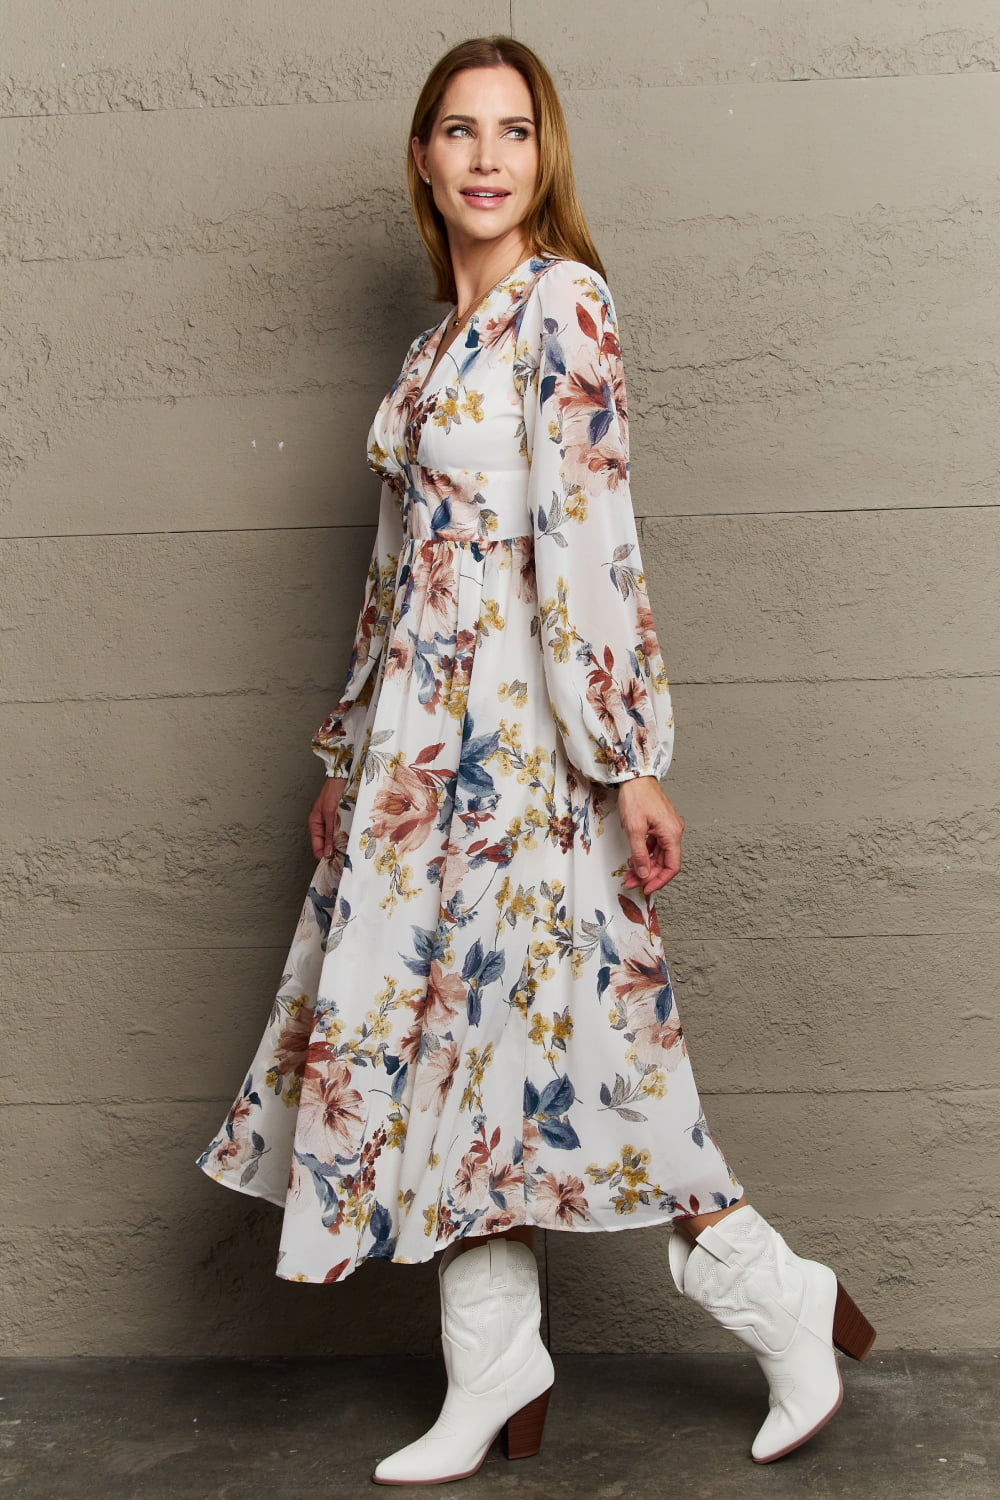 Blooms of Grace: Chiffon Floral Midi Dress with Timeless Elegance